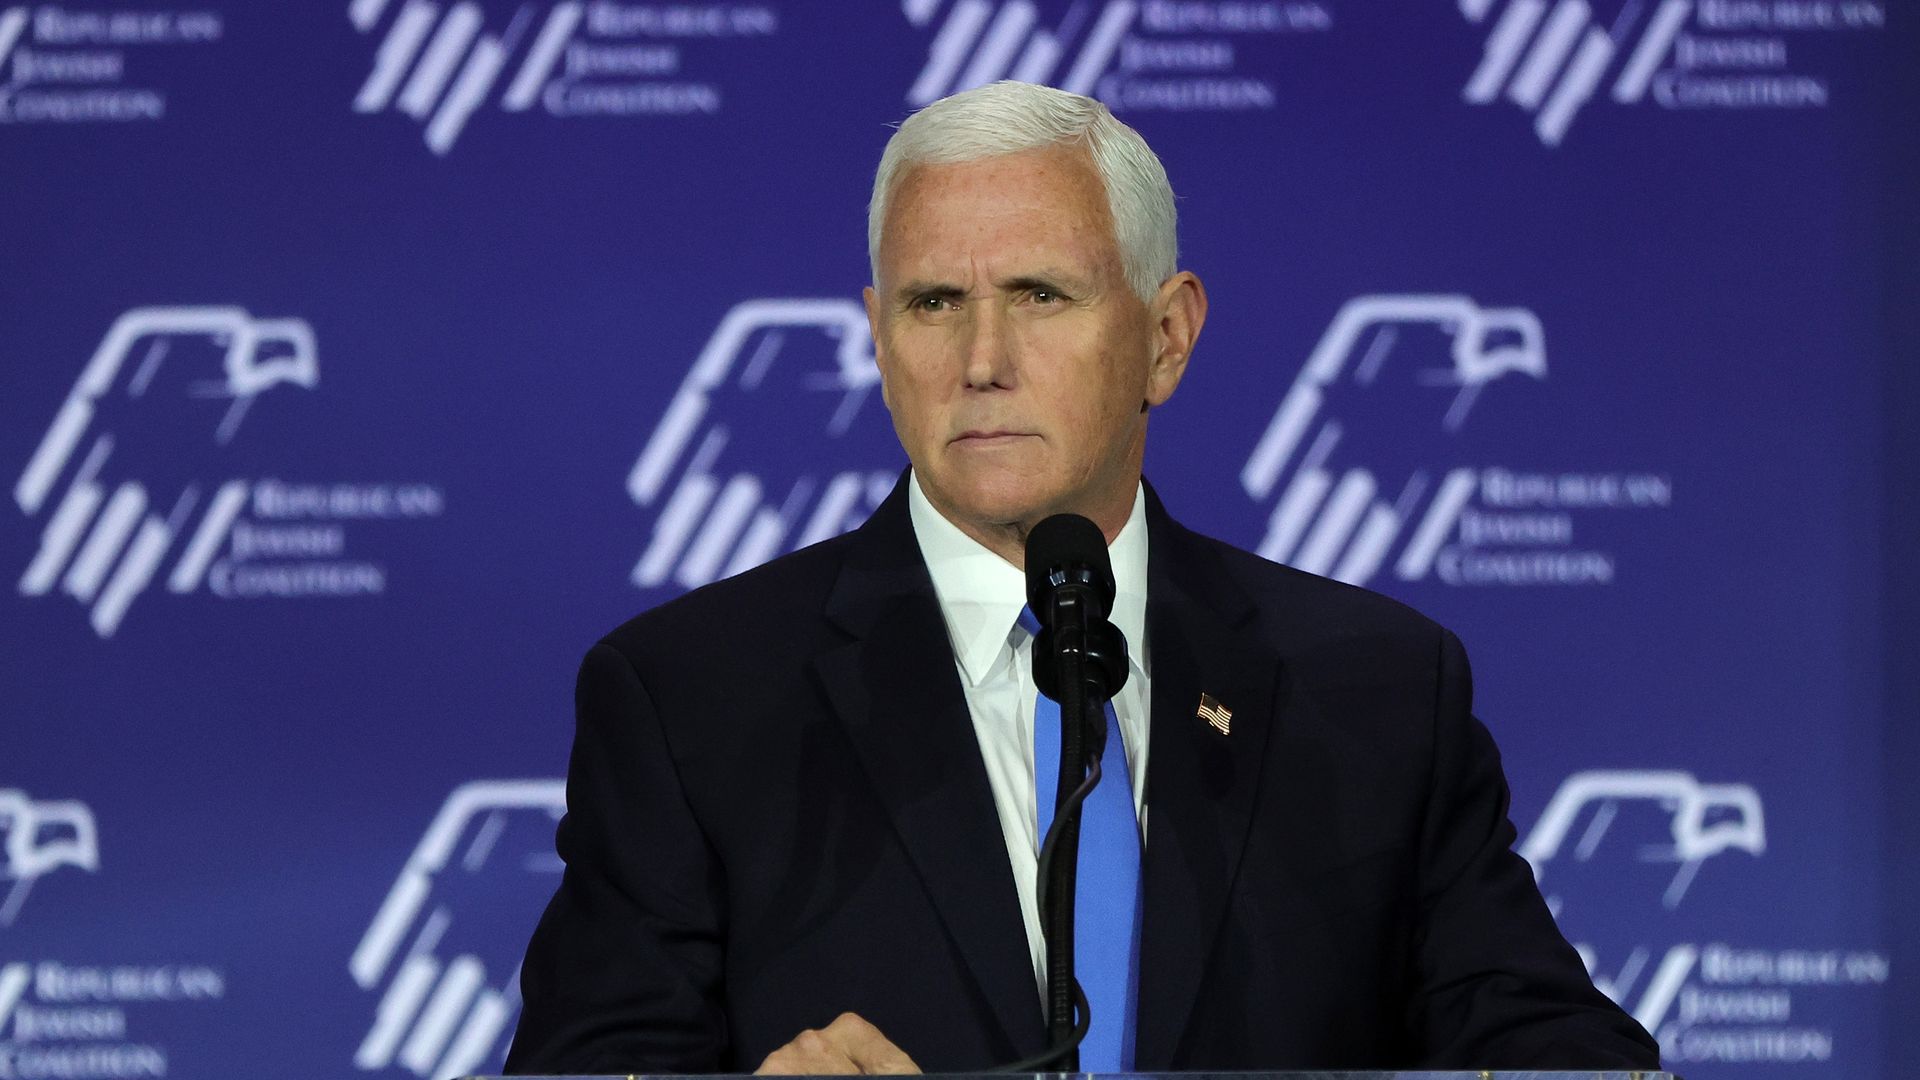 mike pence at rjc